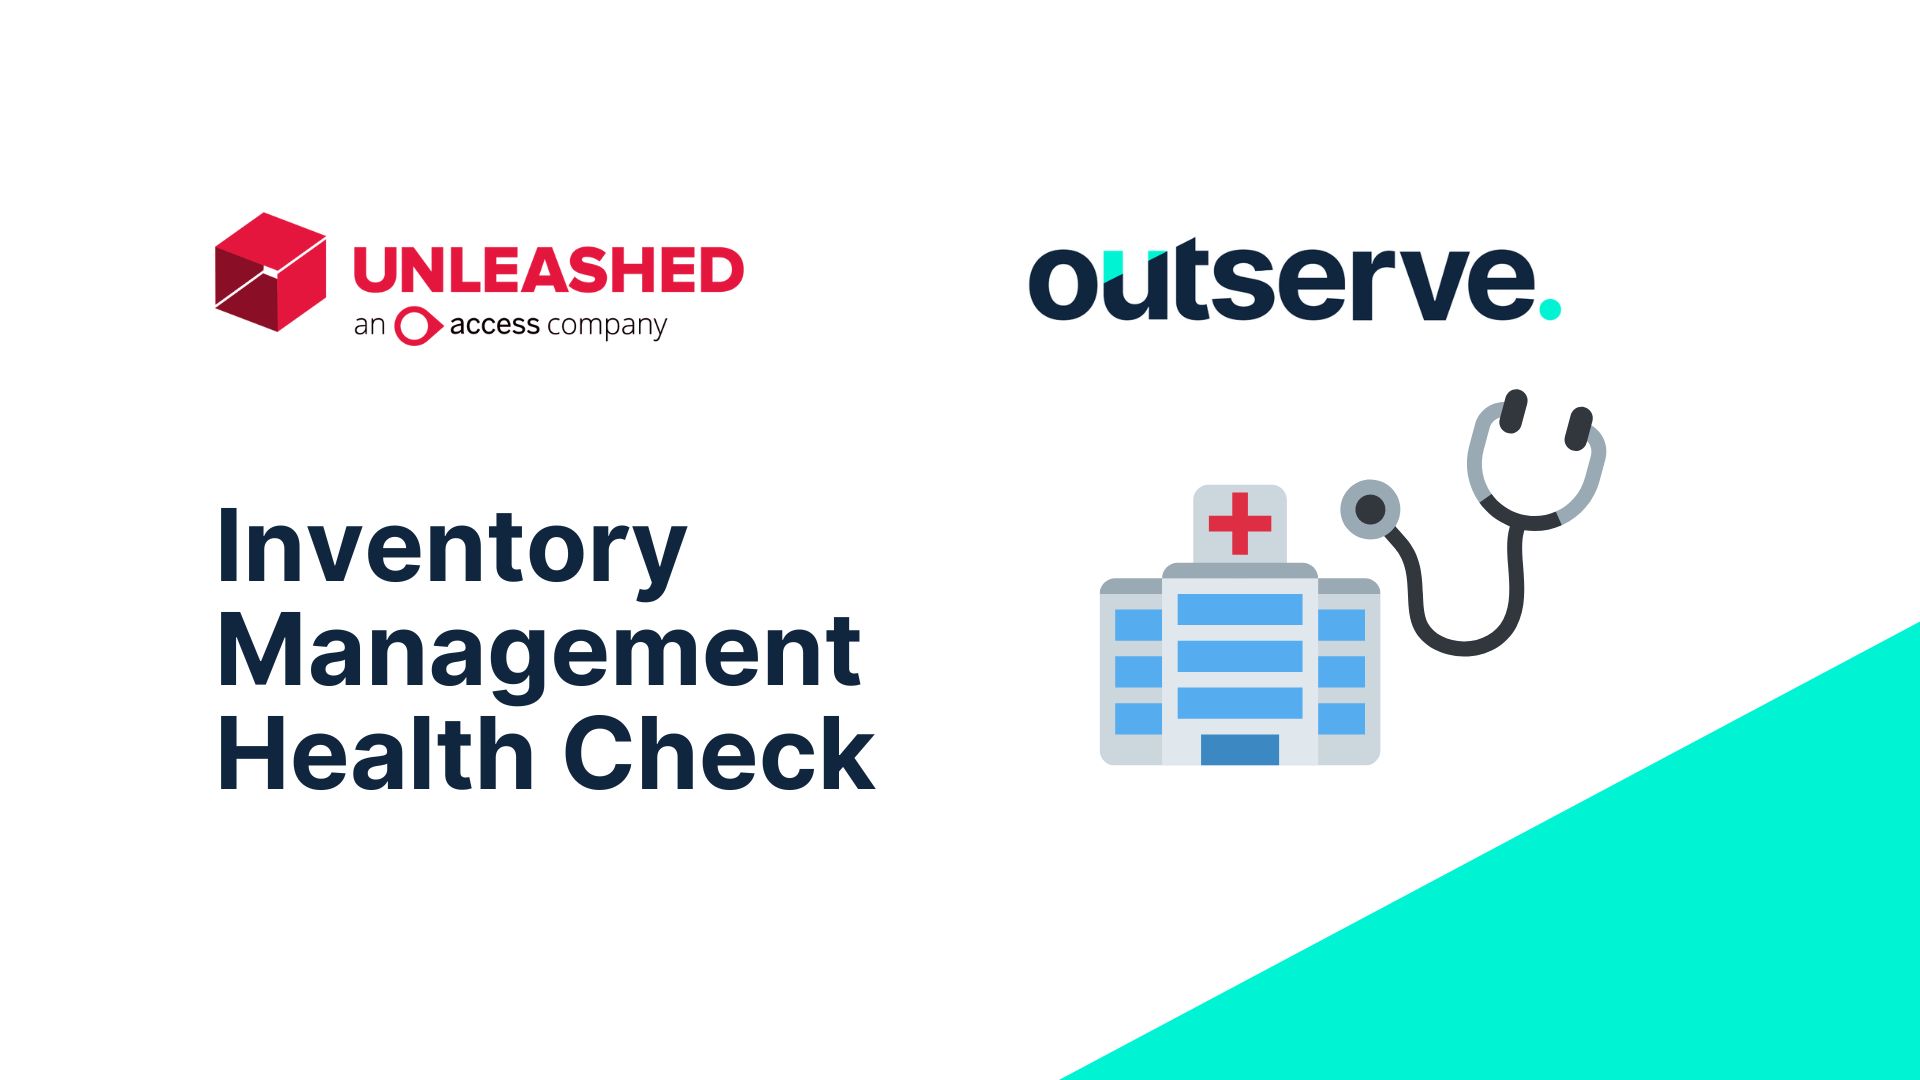 Unleashed Health Check by Outserve